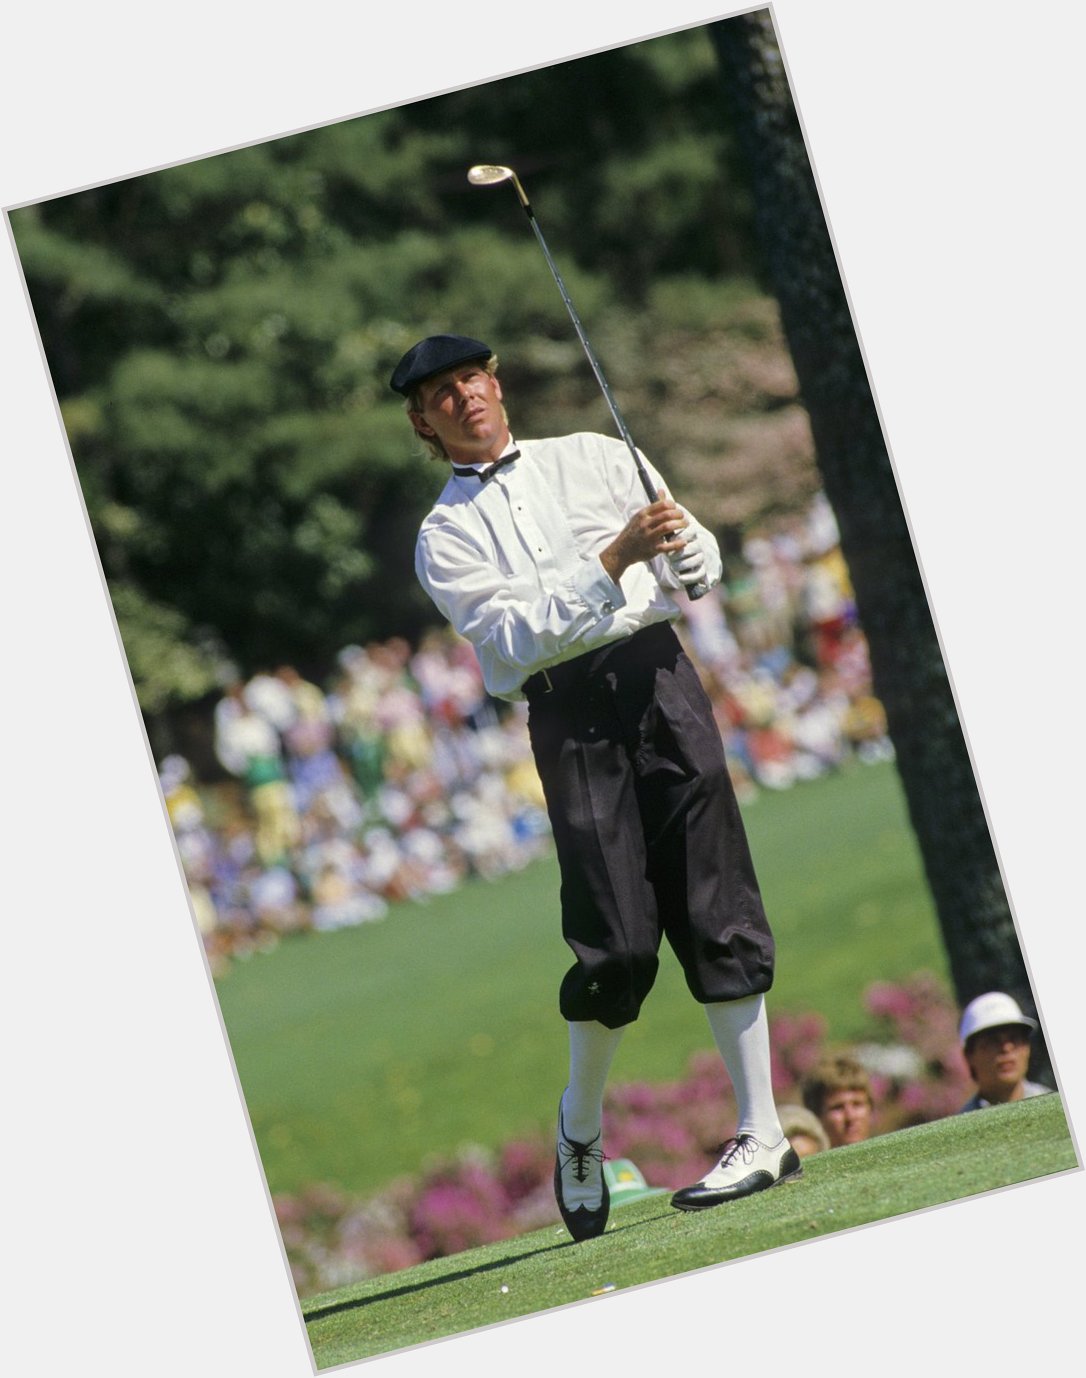 Happy Birthday to the late, great Payne Stewart. His style and personality is missed! 